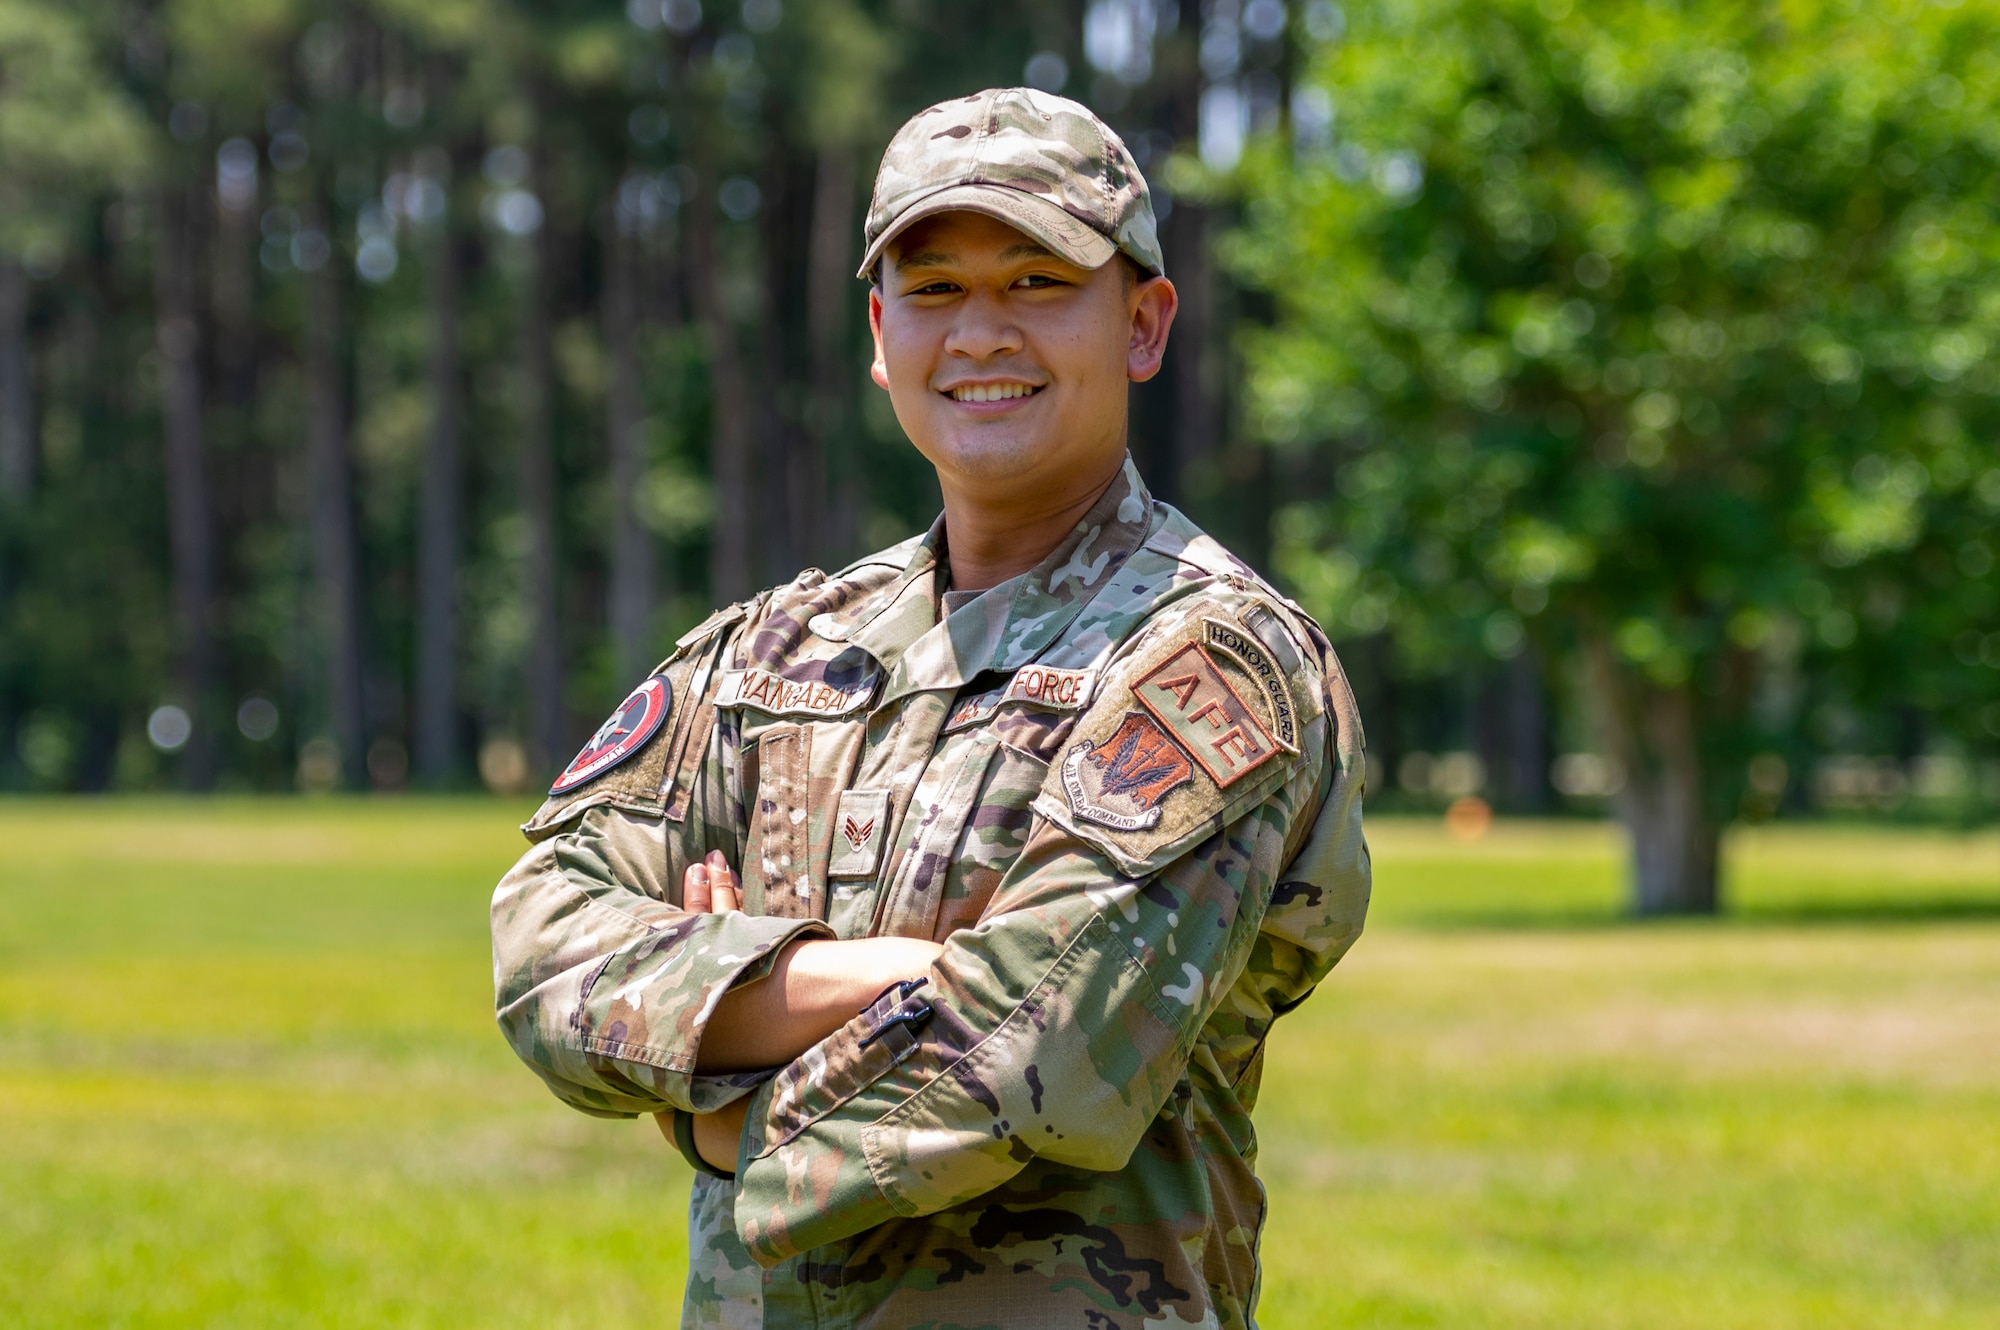 Mangabat is originally from Nueva Ecija, Philippines and joined the Air Force in 2018. (U.S. Air Force photo by Senior Airman Kylie Barrow)